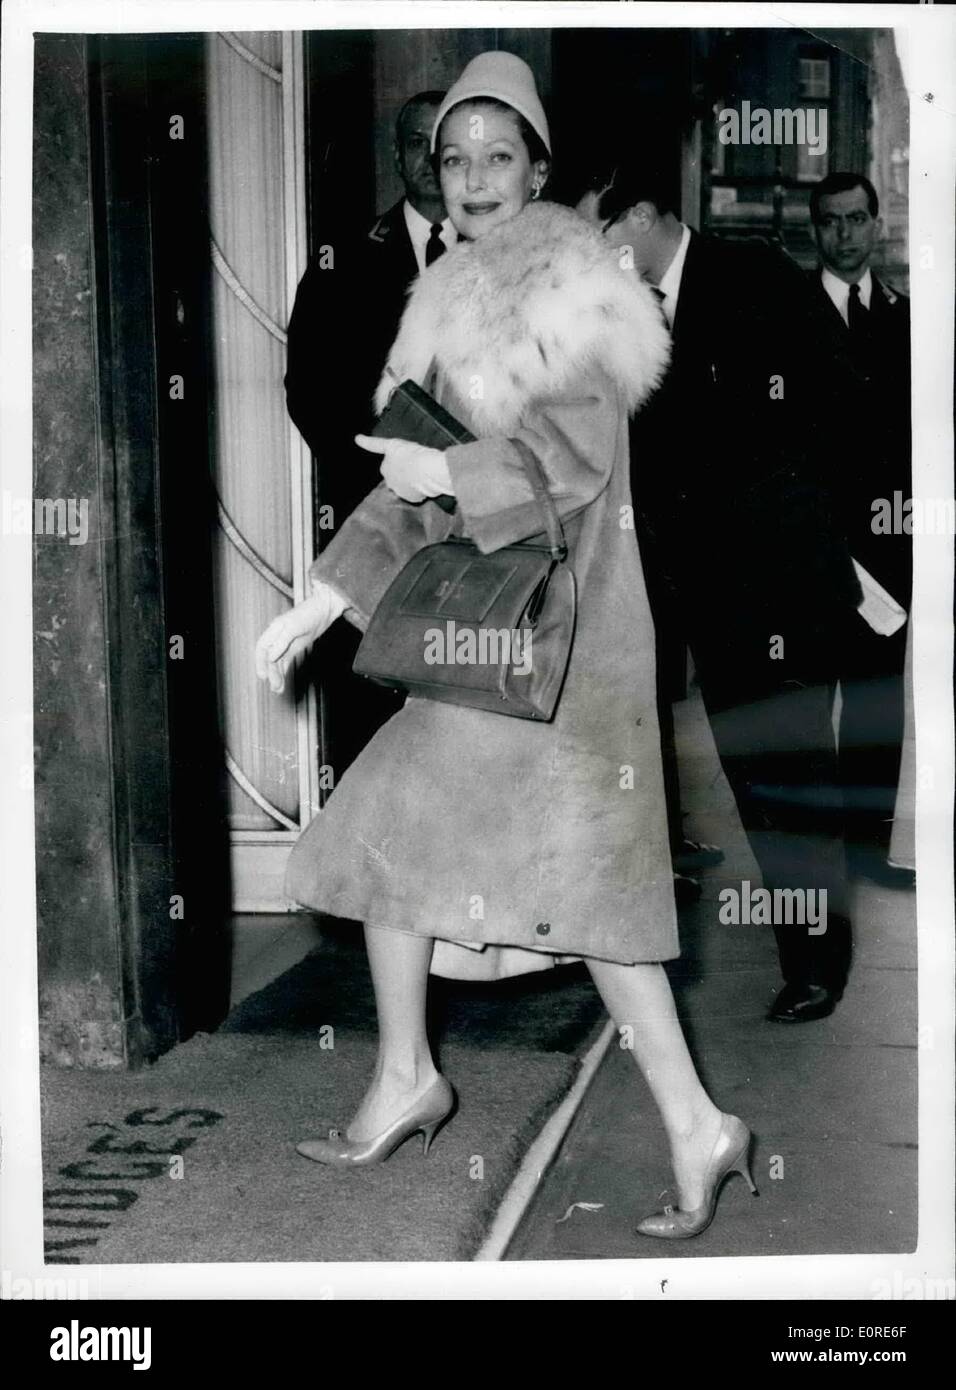 Apr. 04, 1959 - LORZTTA YOUNG IN LONDON, PHOTO SHOWS'. Hollywood film star, LORETTA Young still glamorous at 46 pictured in London where she was a surprise visitor yesterday. Oho is here to meet a British child motor she -hopes -to star with in a film for Imerlean 17. A bit.part player is 1930, Loretta became world famous is foy years. Stock Photo